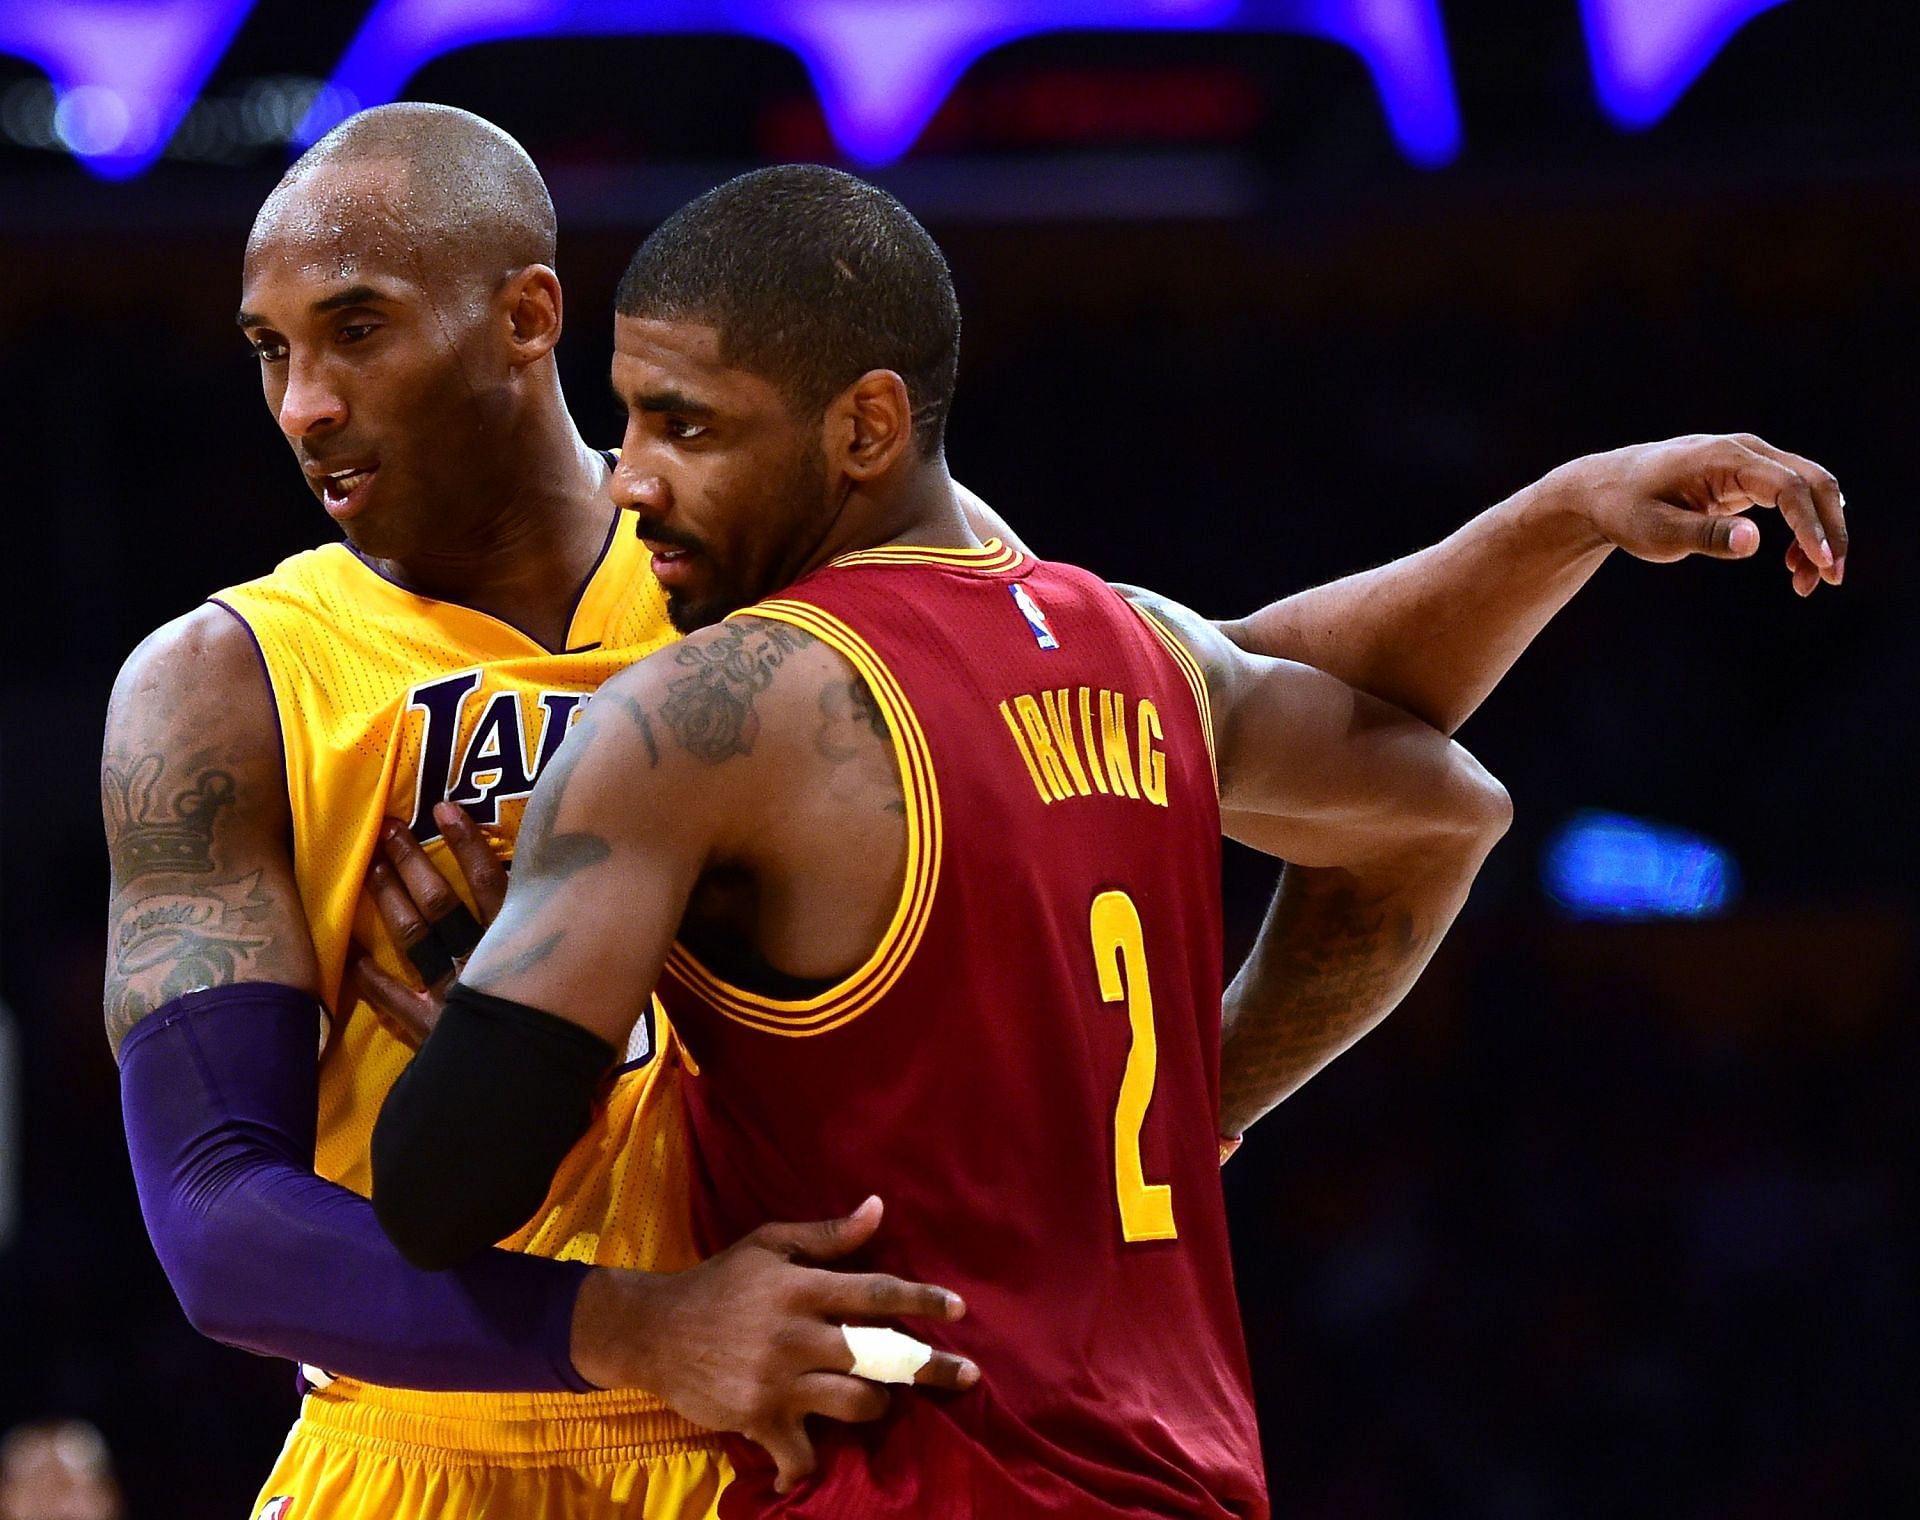 Kyrie Irving has been reportedly going after teammates in practice the way Kobe Bryant and Michael Jordan once did.